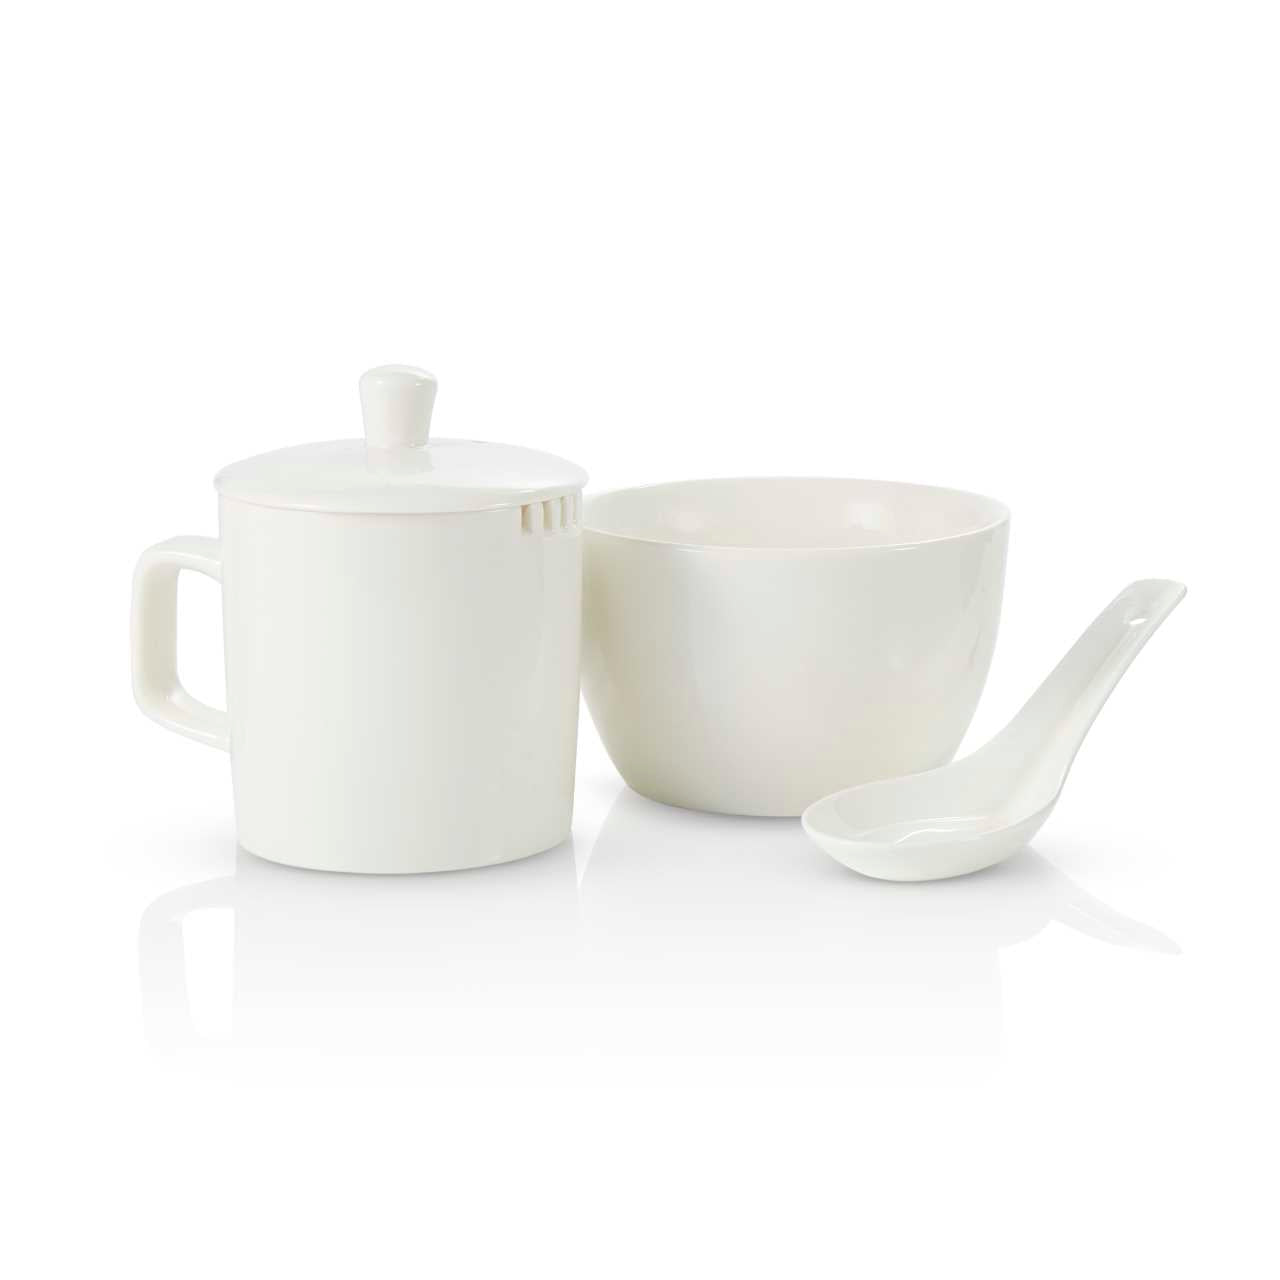 Tea Tasting cup set with cup, bowl and spoon